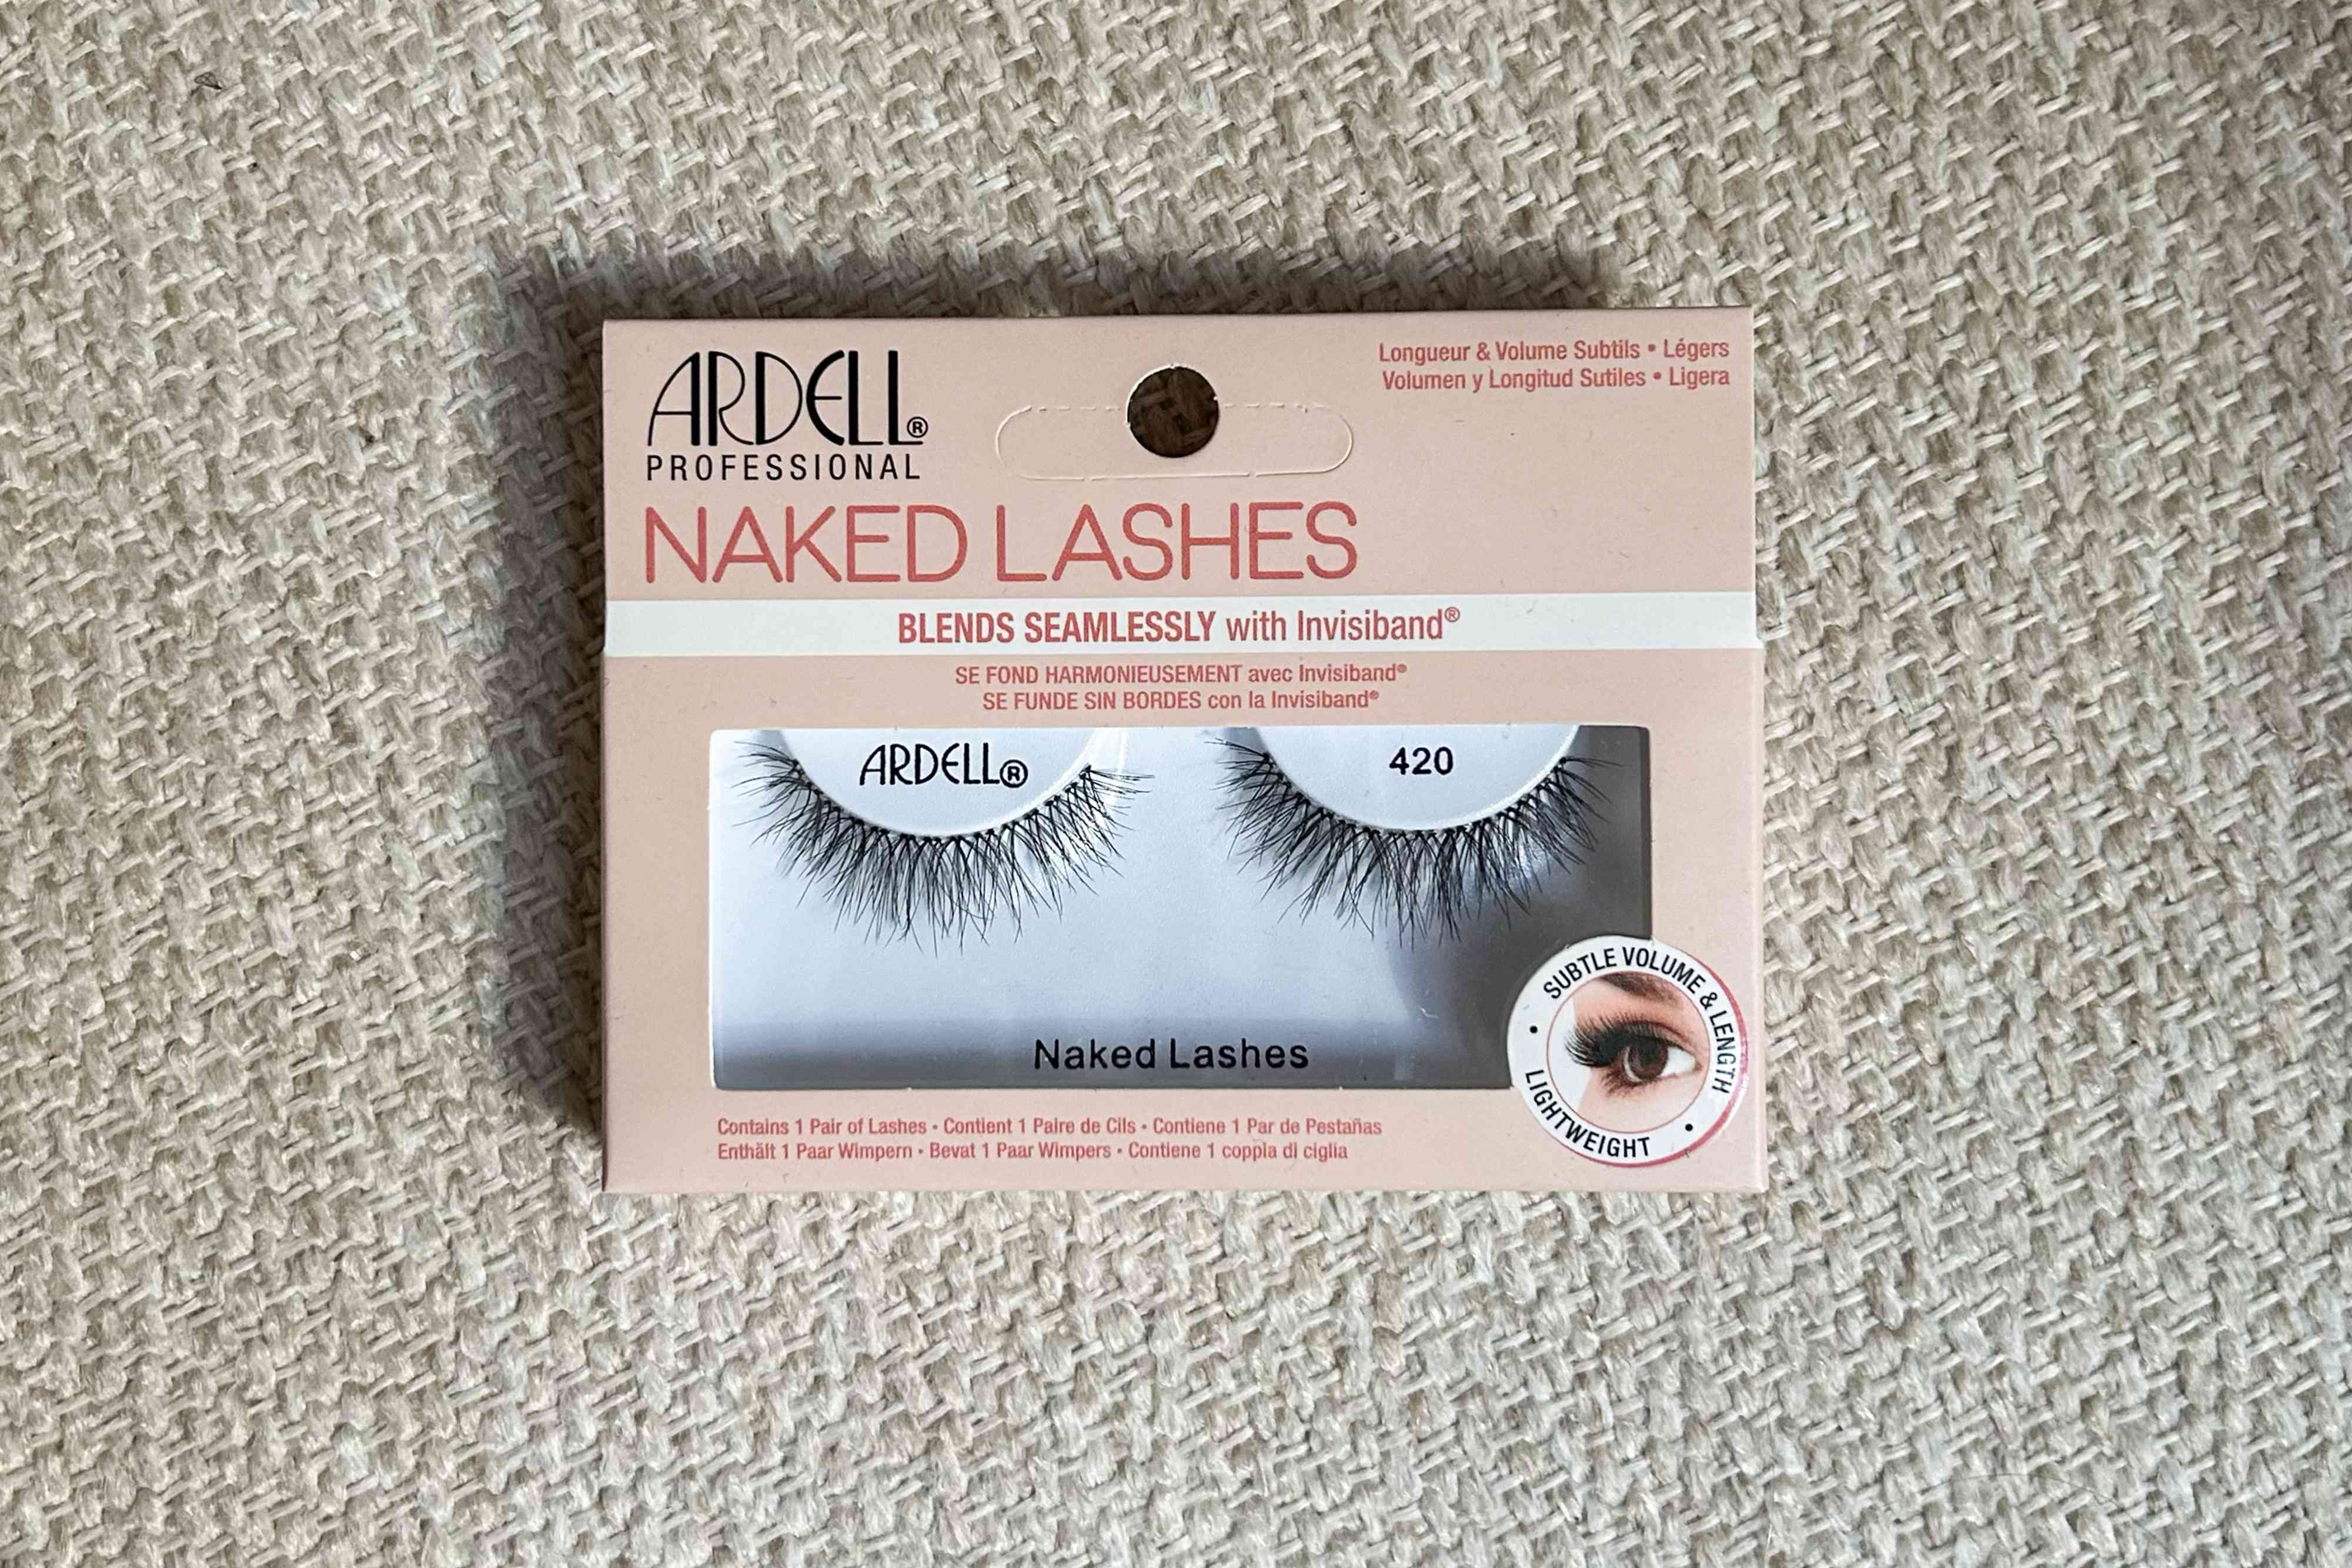 Ardell Naked Lashes on a flat patterned surface 